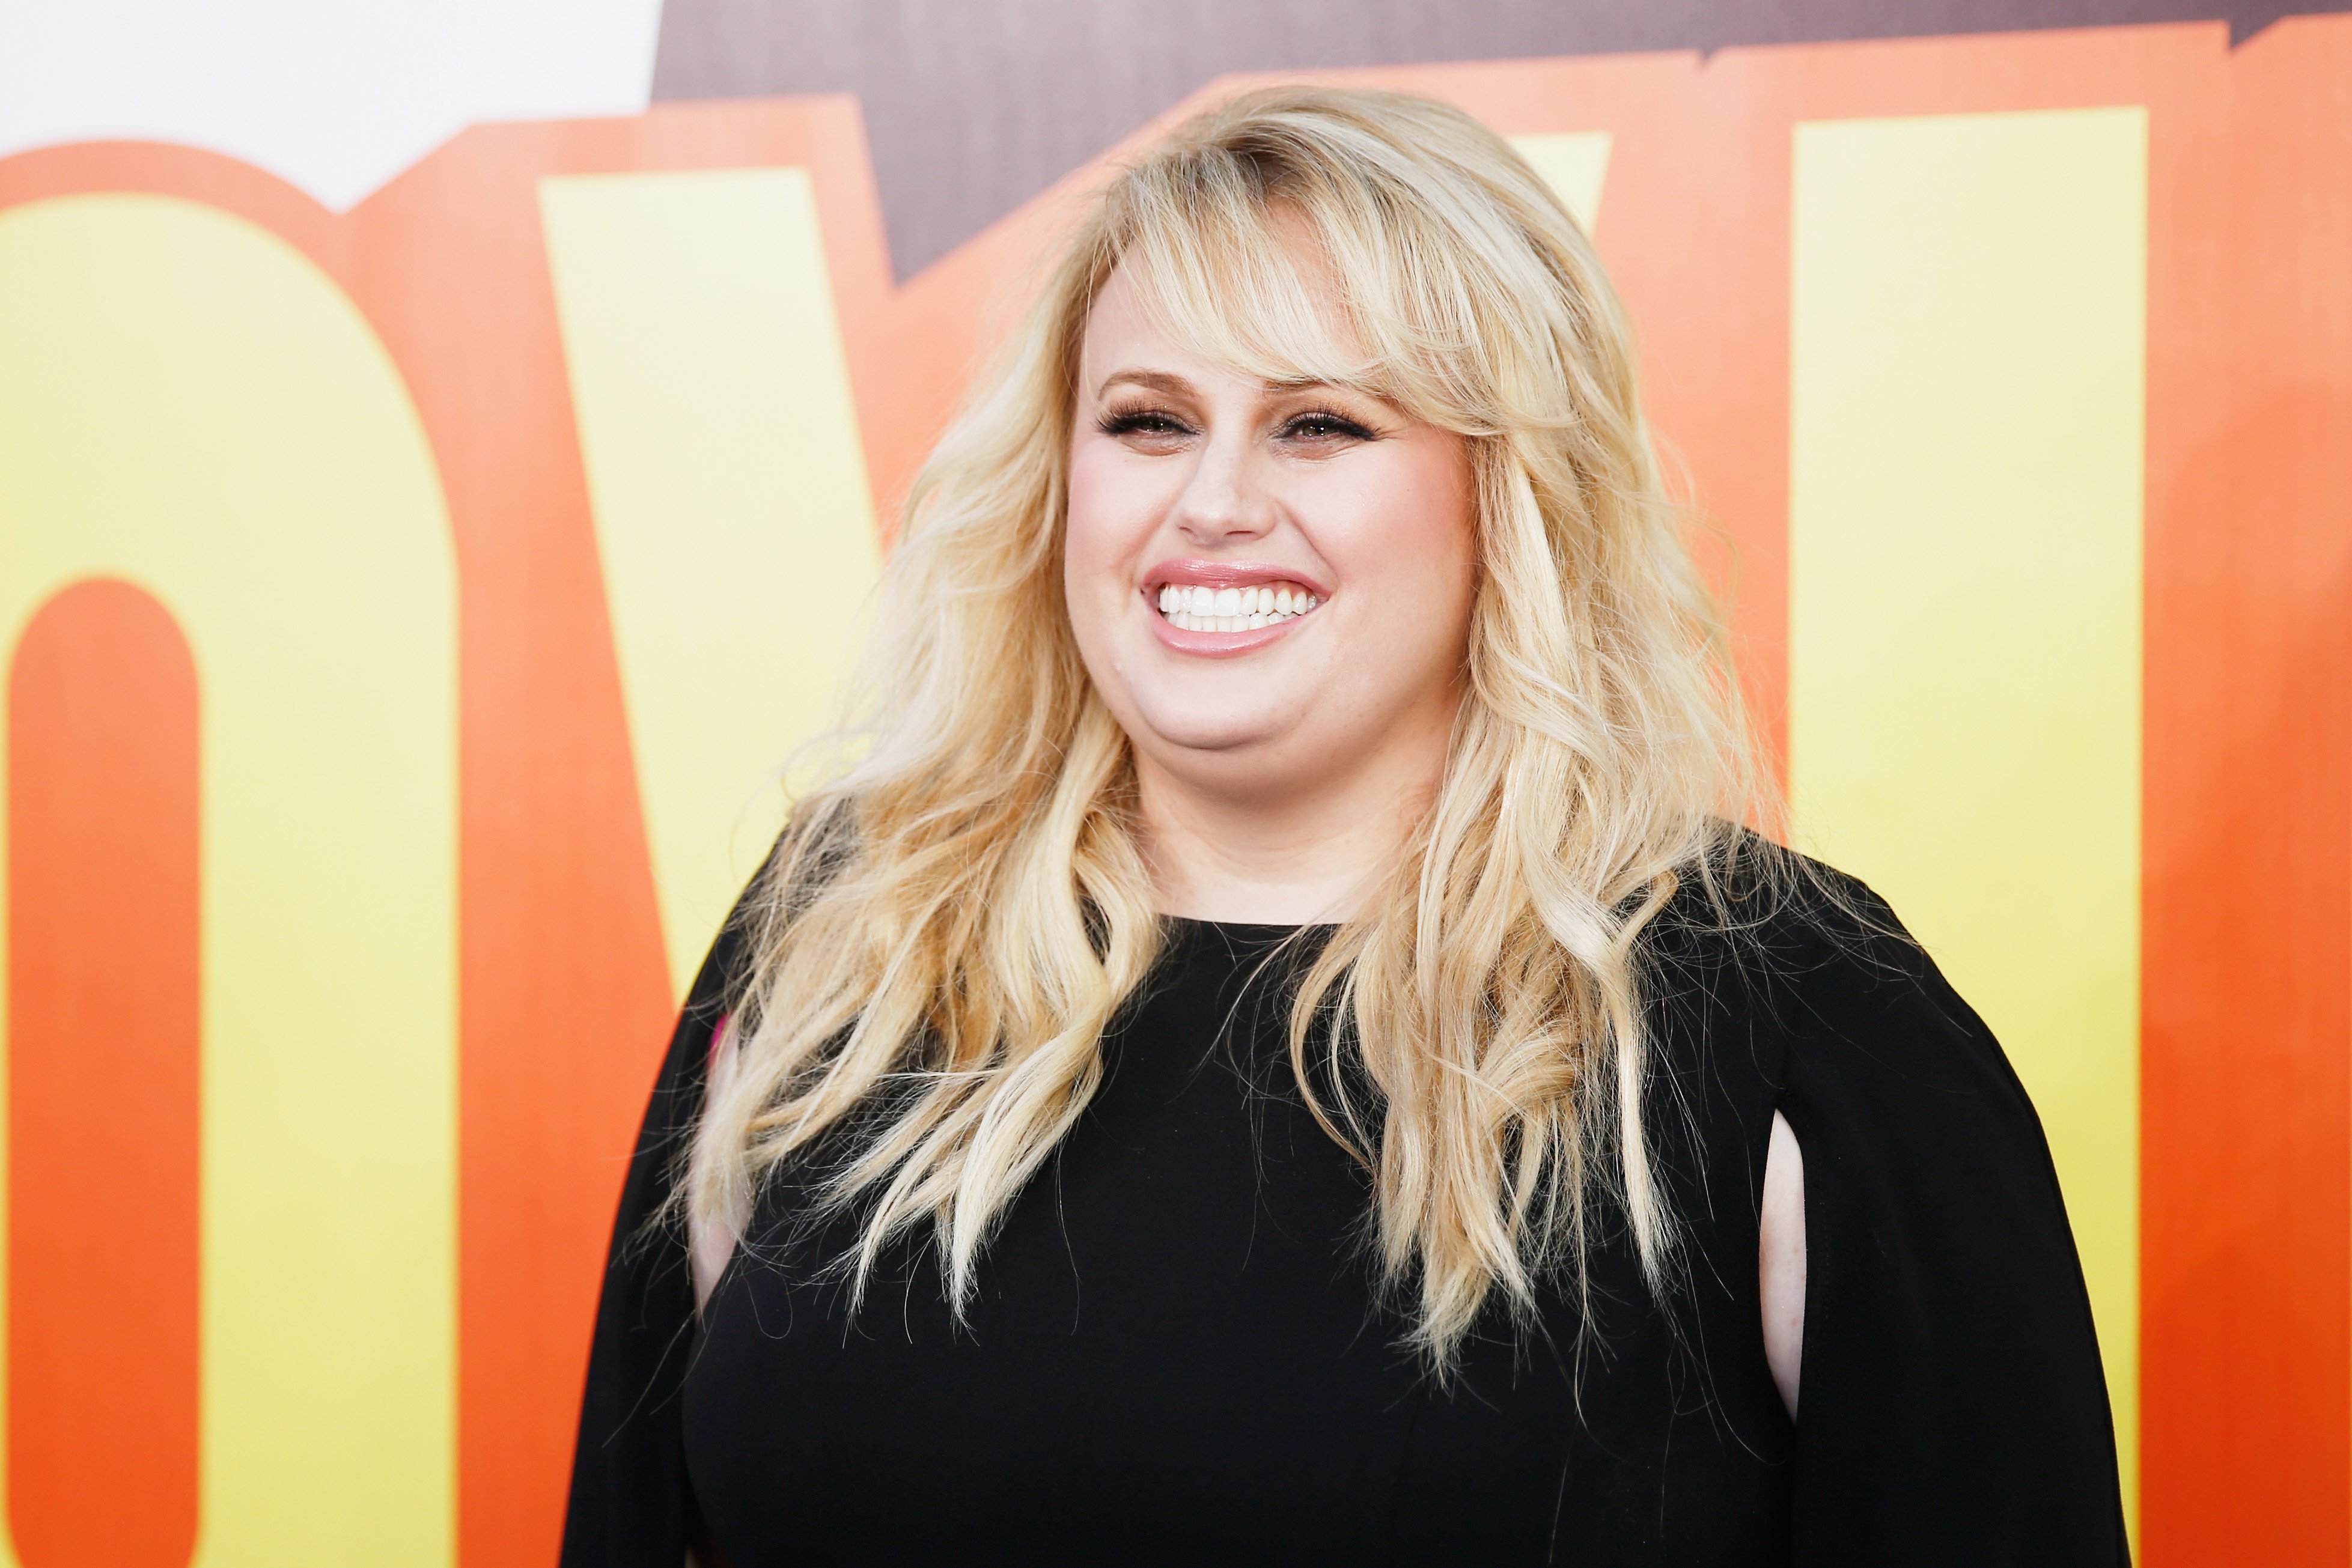 Rebel Wilson picture at the The 2015 MTV Movie Awards at Nokia Theatre L.A. Live, 2015, California. | Photo: Getty Images